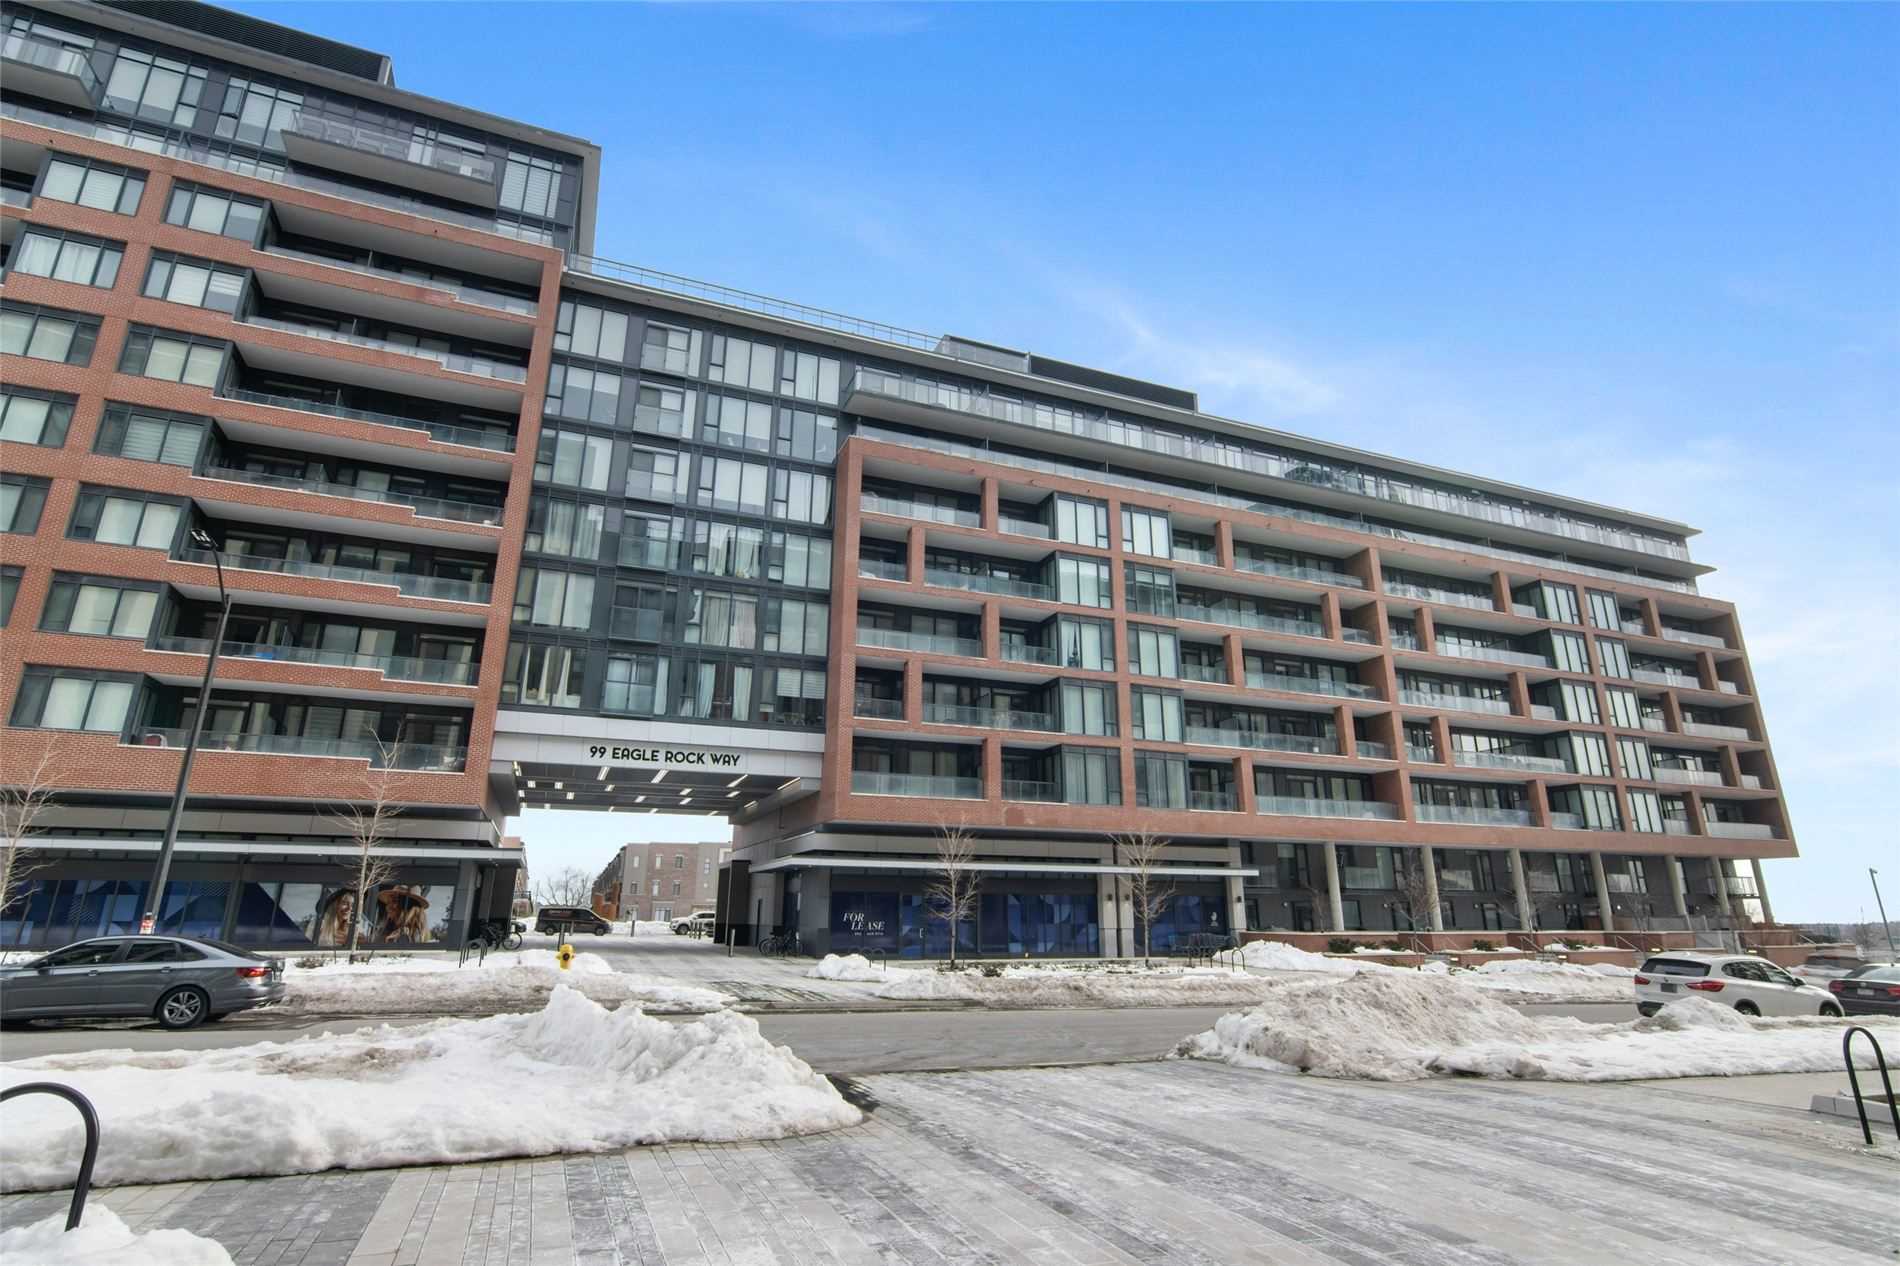 2+2 BDRM Condo for Sale at 99 Eagle Rock Way in Maple